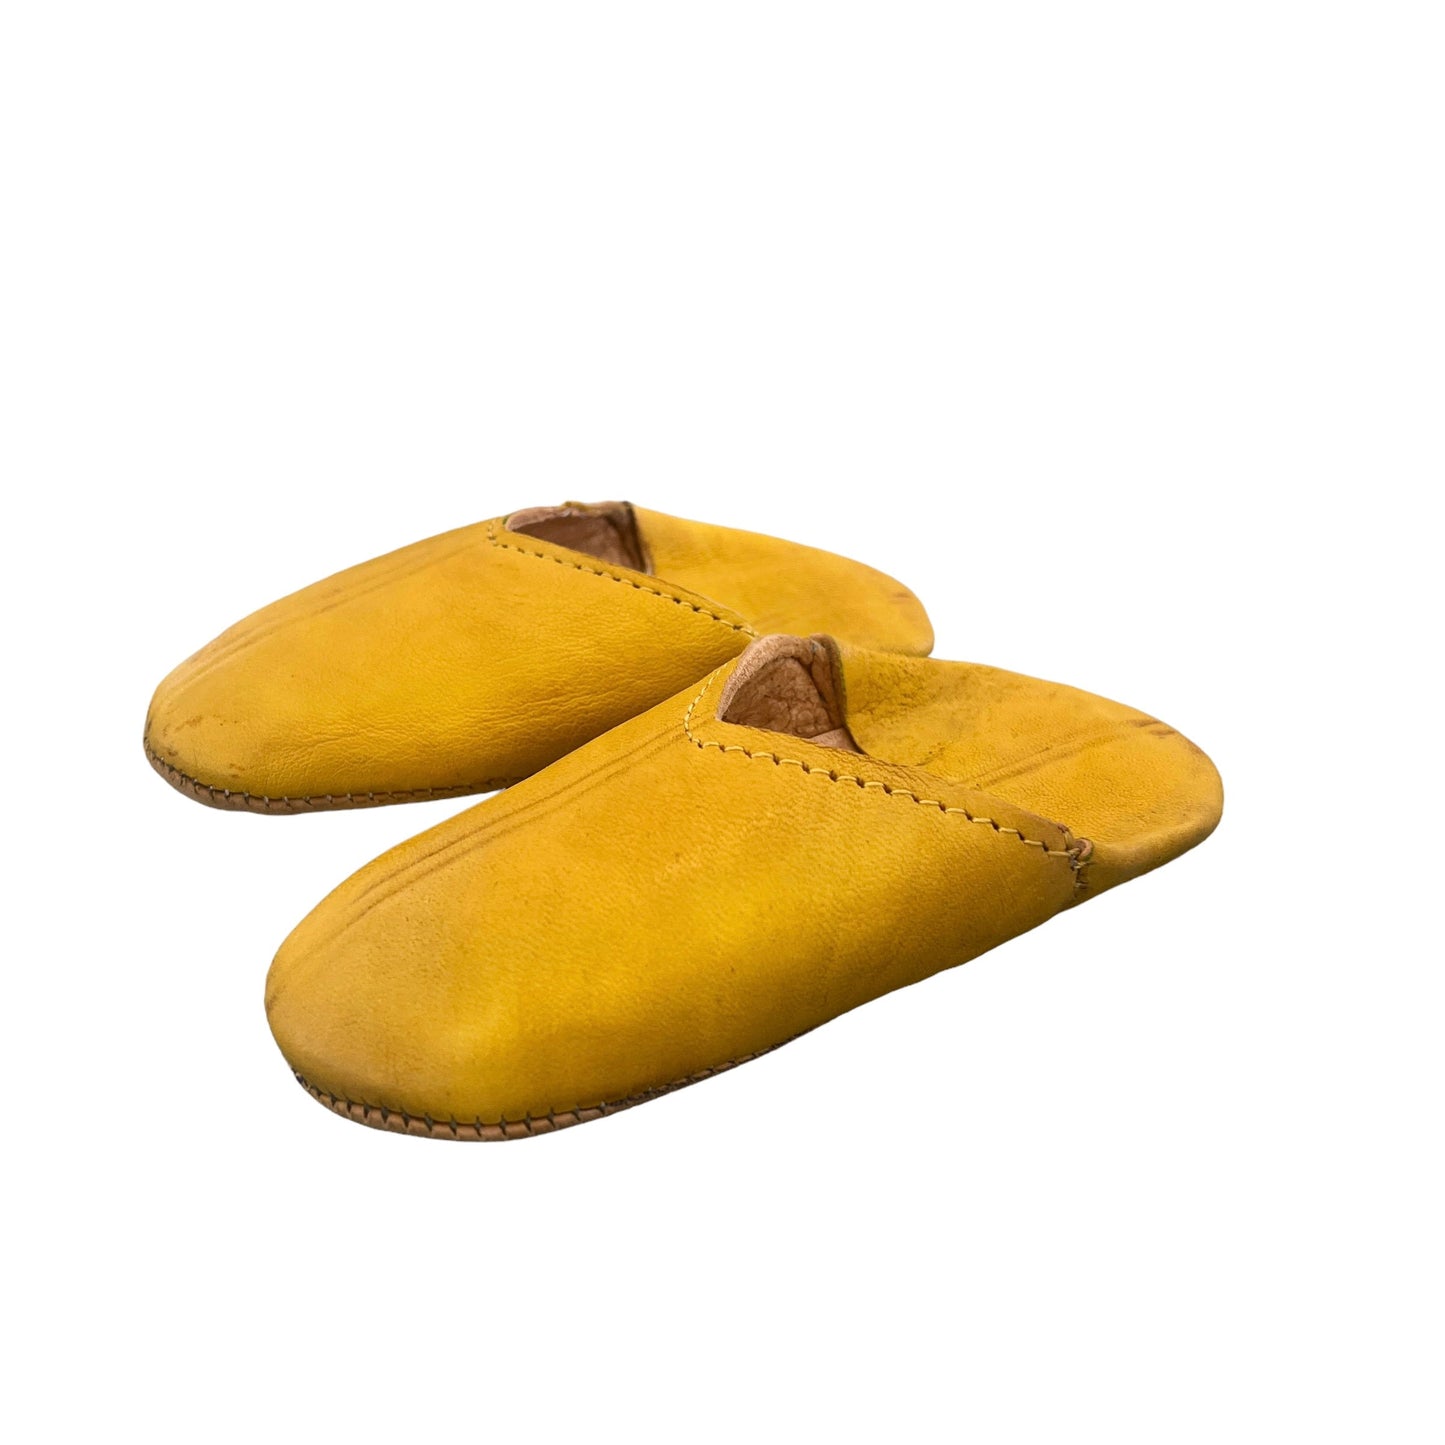 Vintage Moroccan Baby Slippers Size EU 22